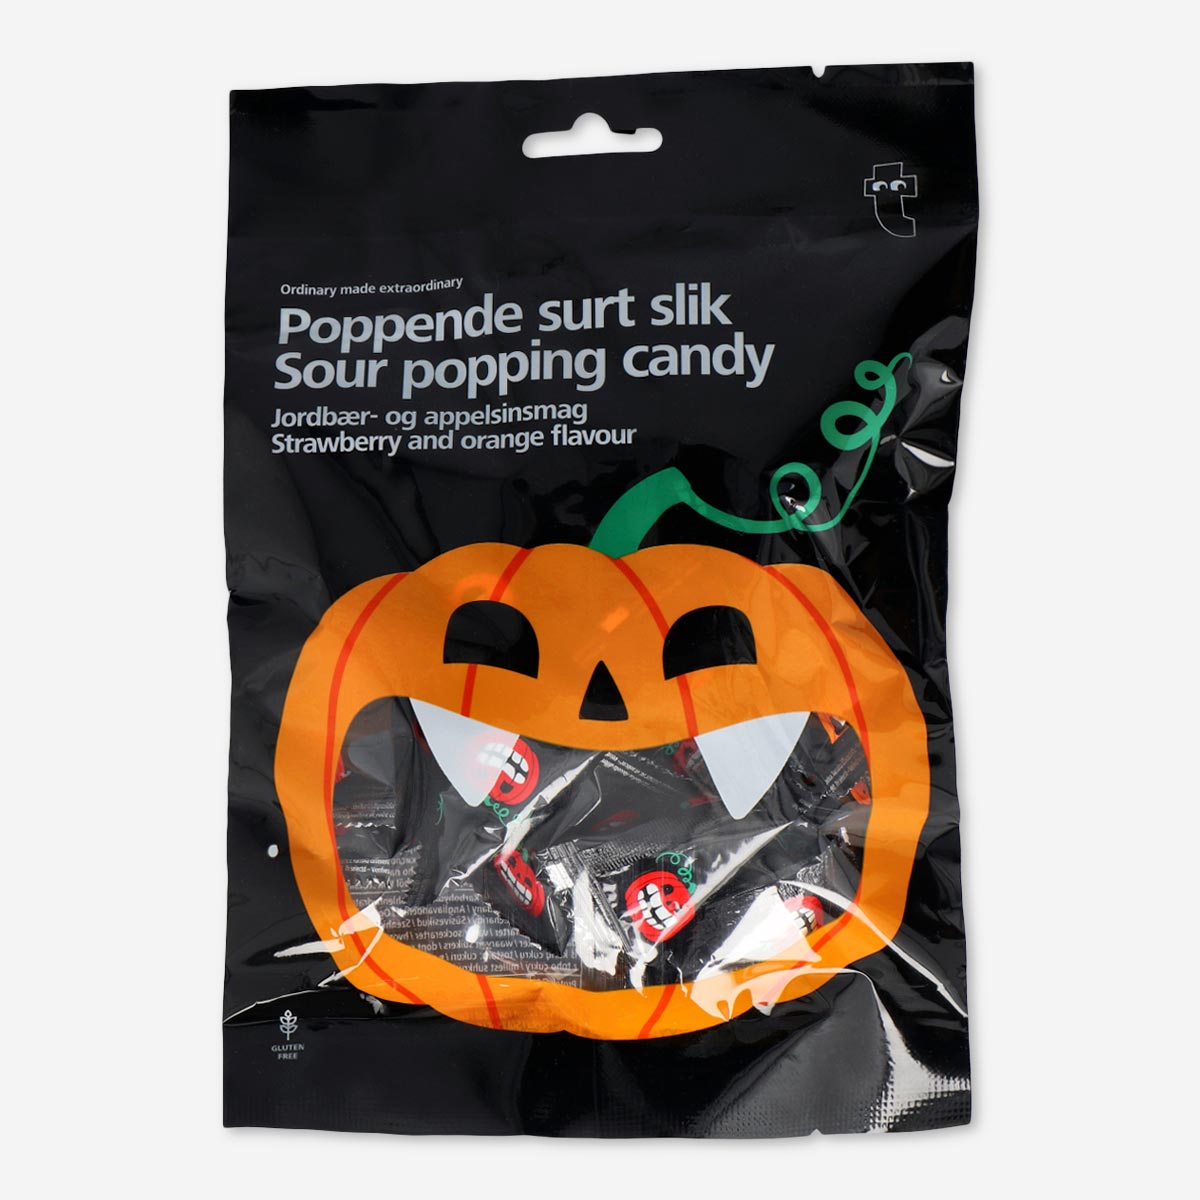 Image of Sour popping candy. Strawberry and orange flavour